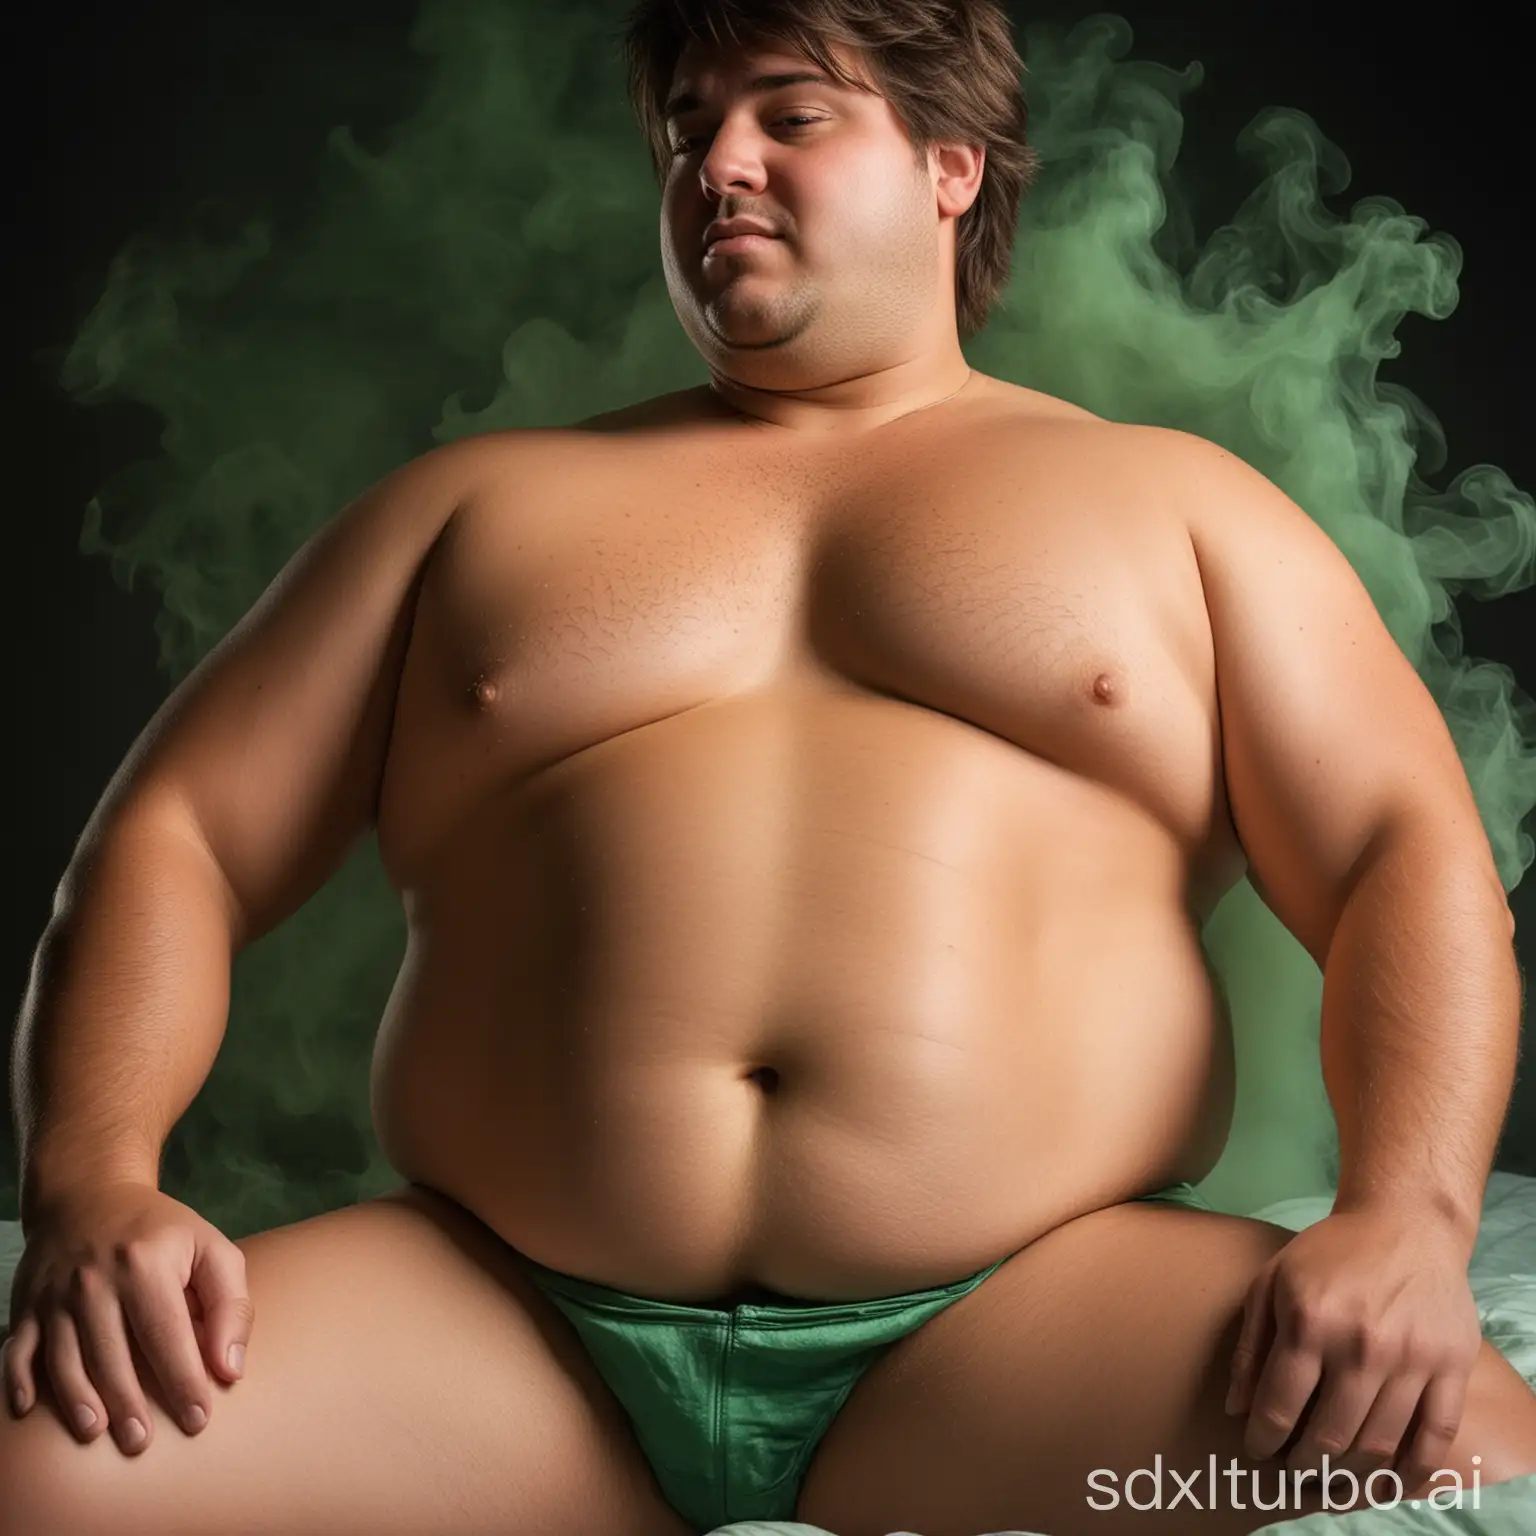 Young-Chubby-Man-with-Mullet-Hair-Spreading-Green-Smoke-in-Bed